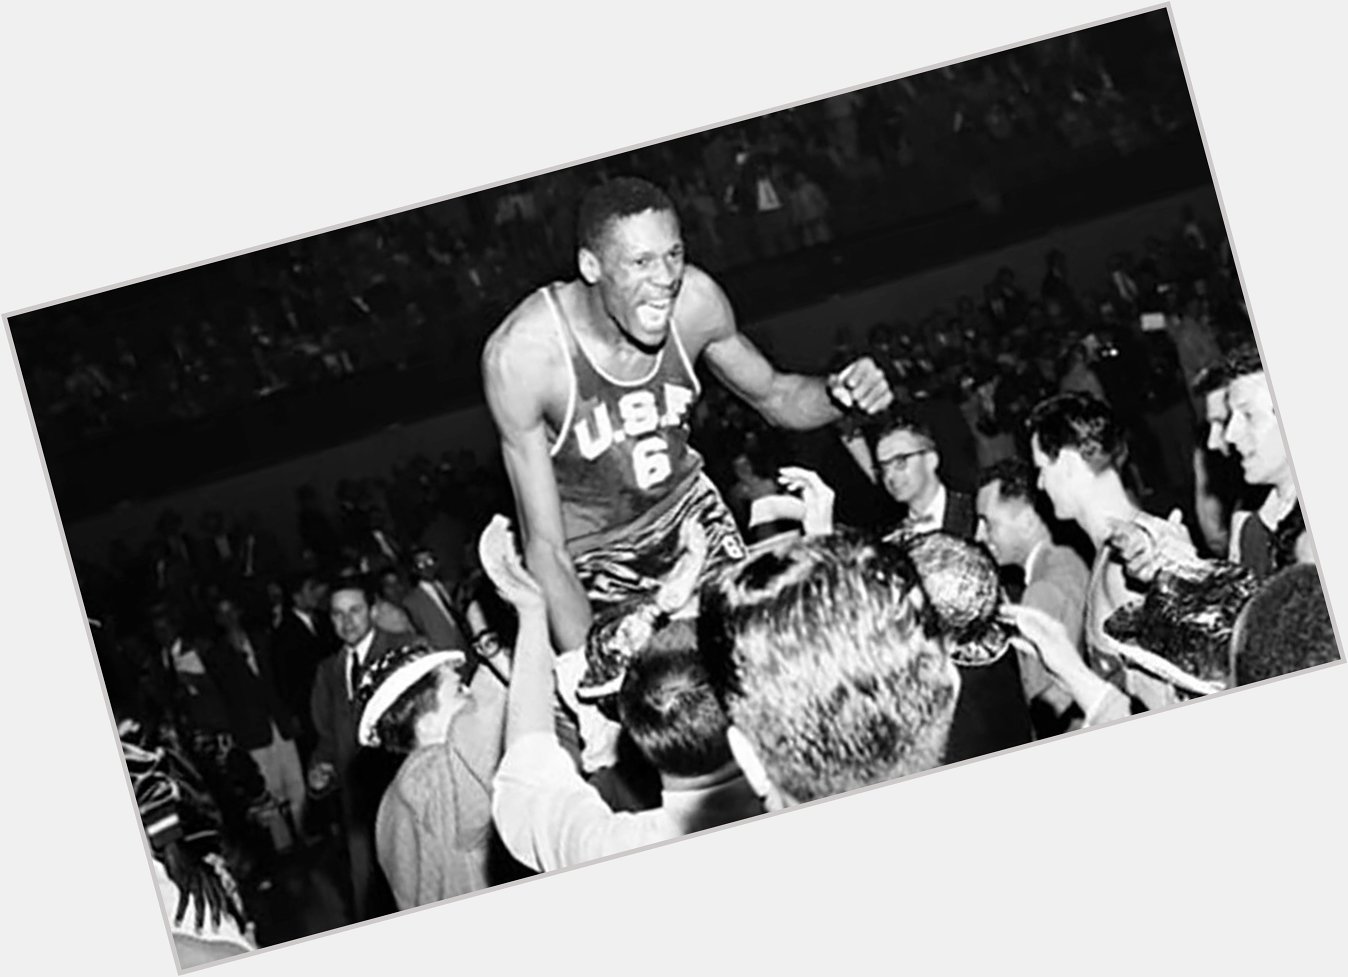 Happy birthday to one of the greatest winners of all-time! 

Bill Russell turns 87 today! | 